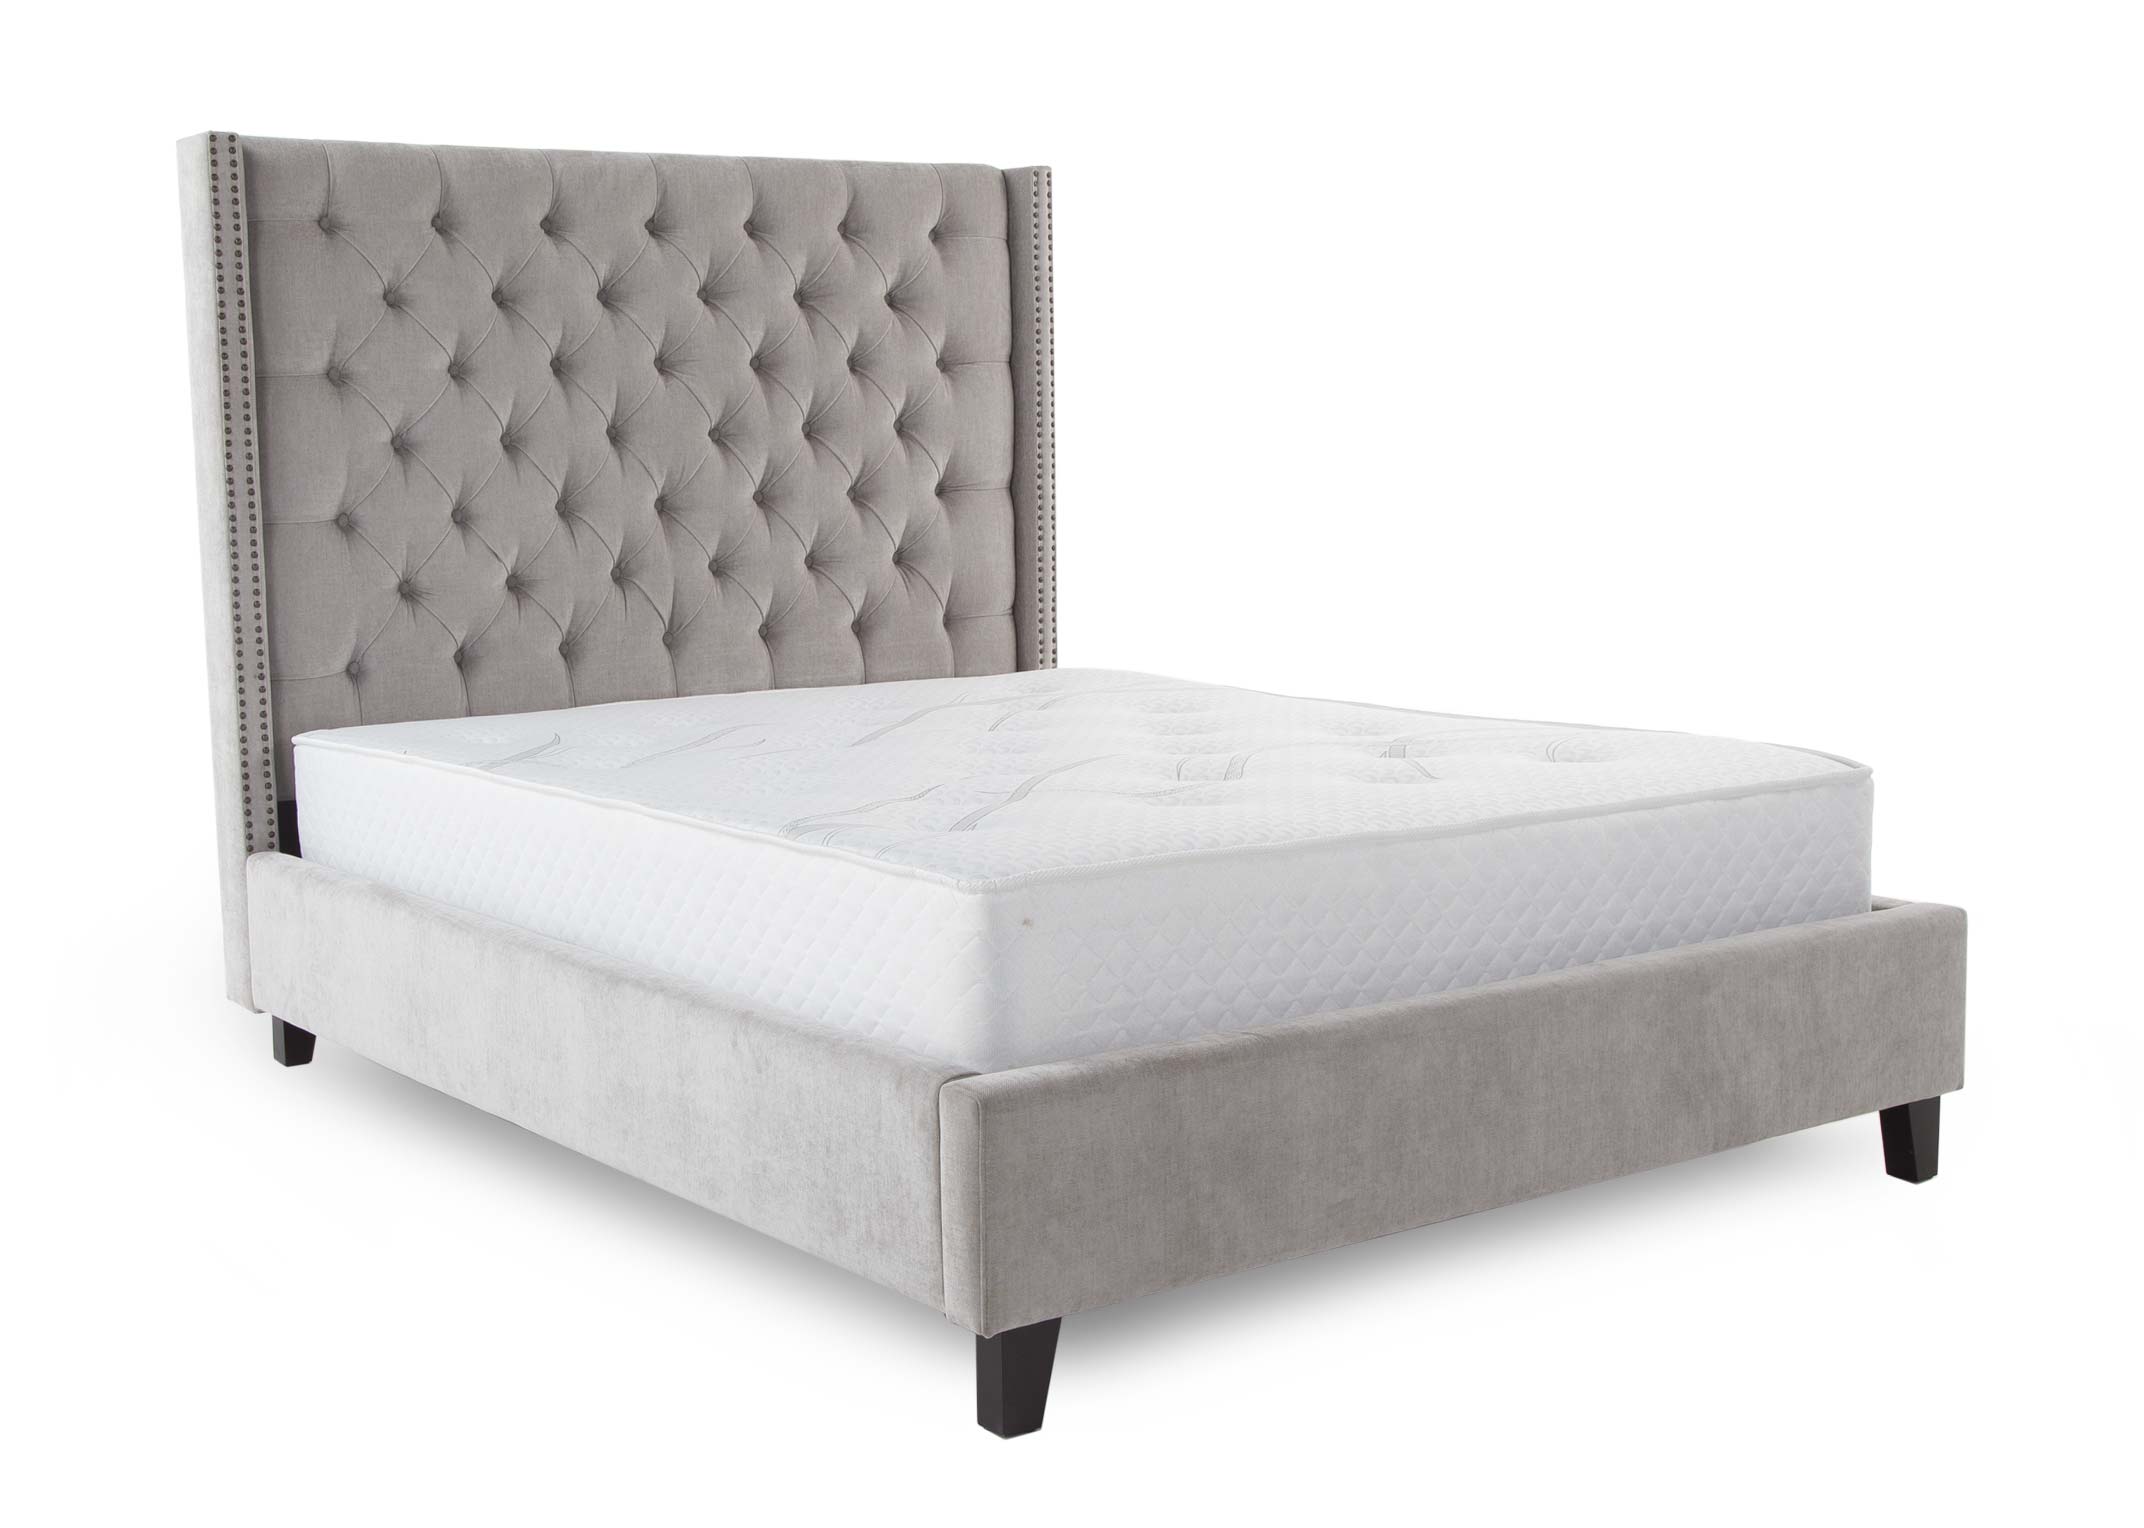 King Size 5ft Grey Fabric Bed Frame, Grey King Size Bed Frame